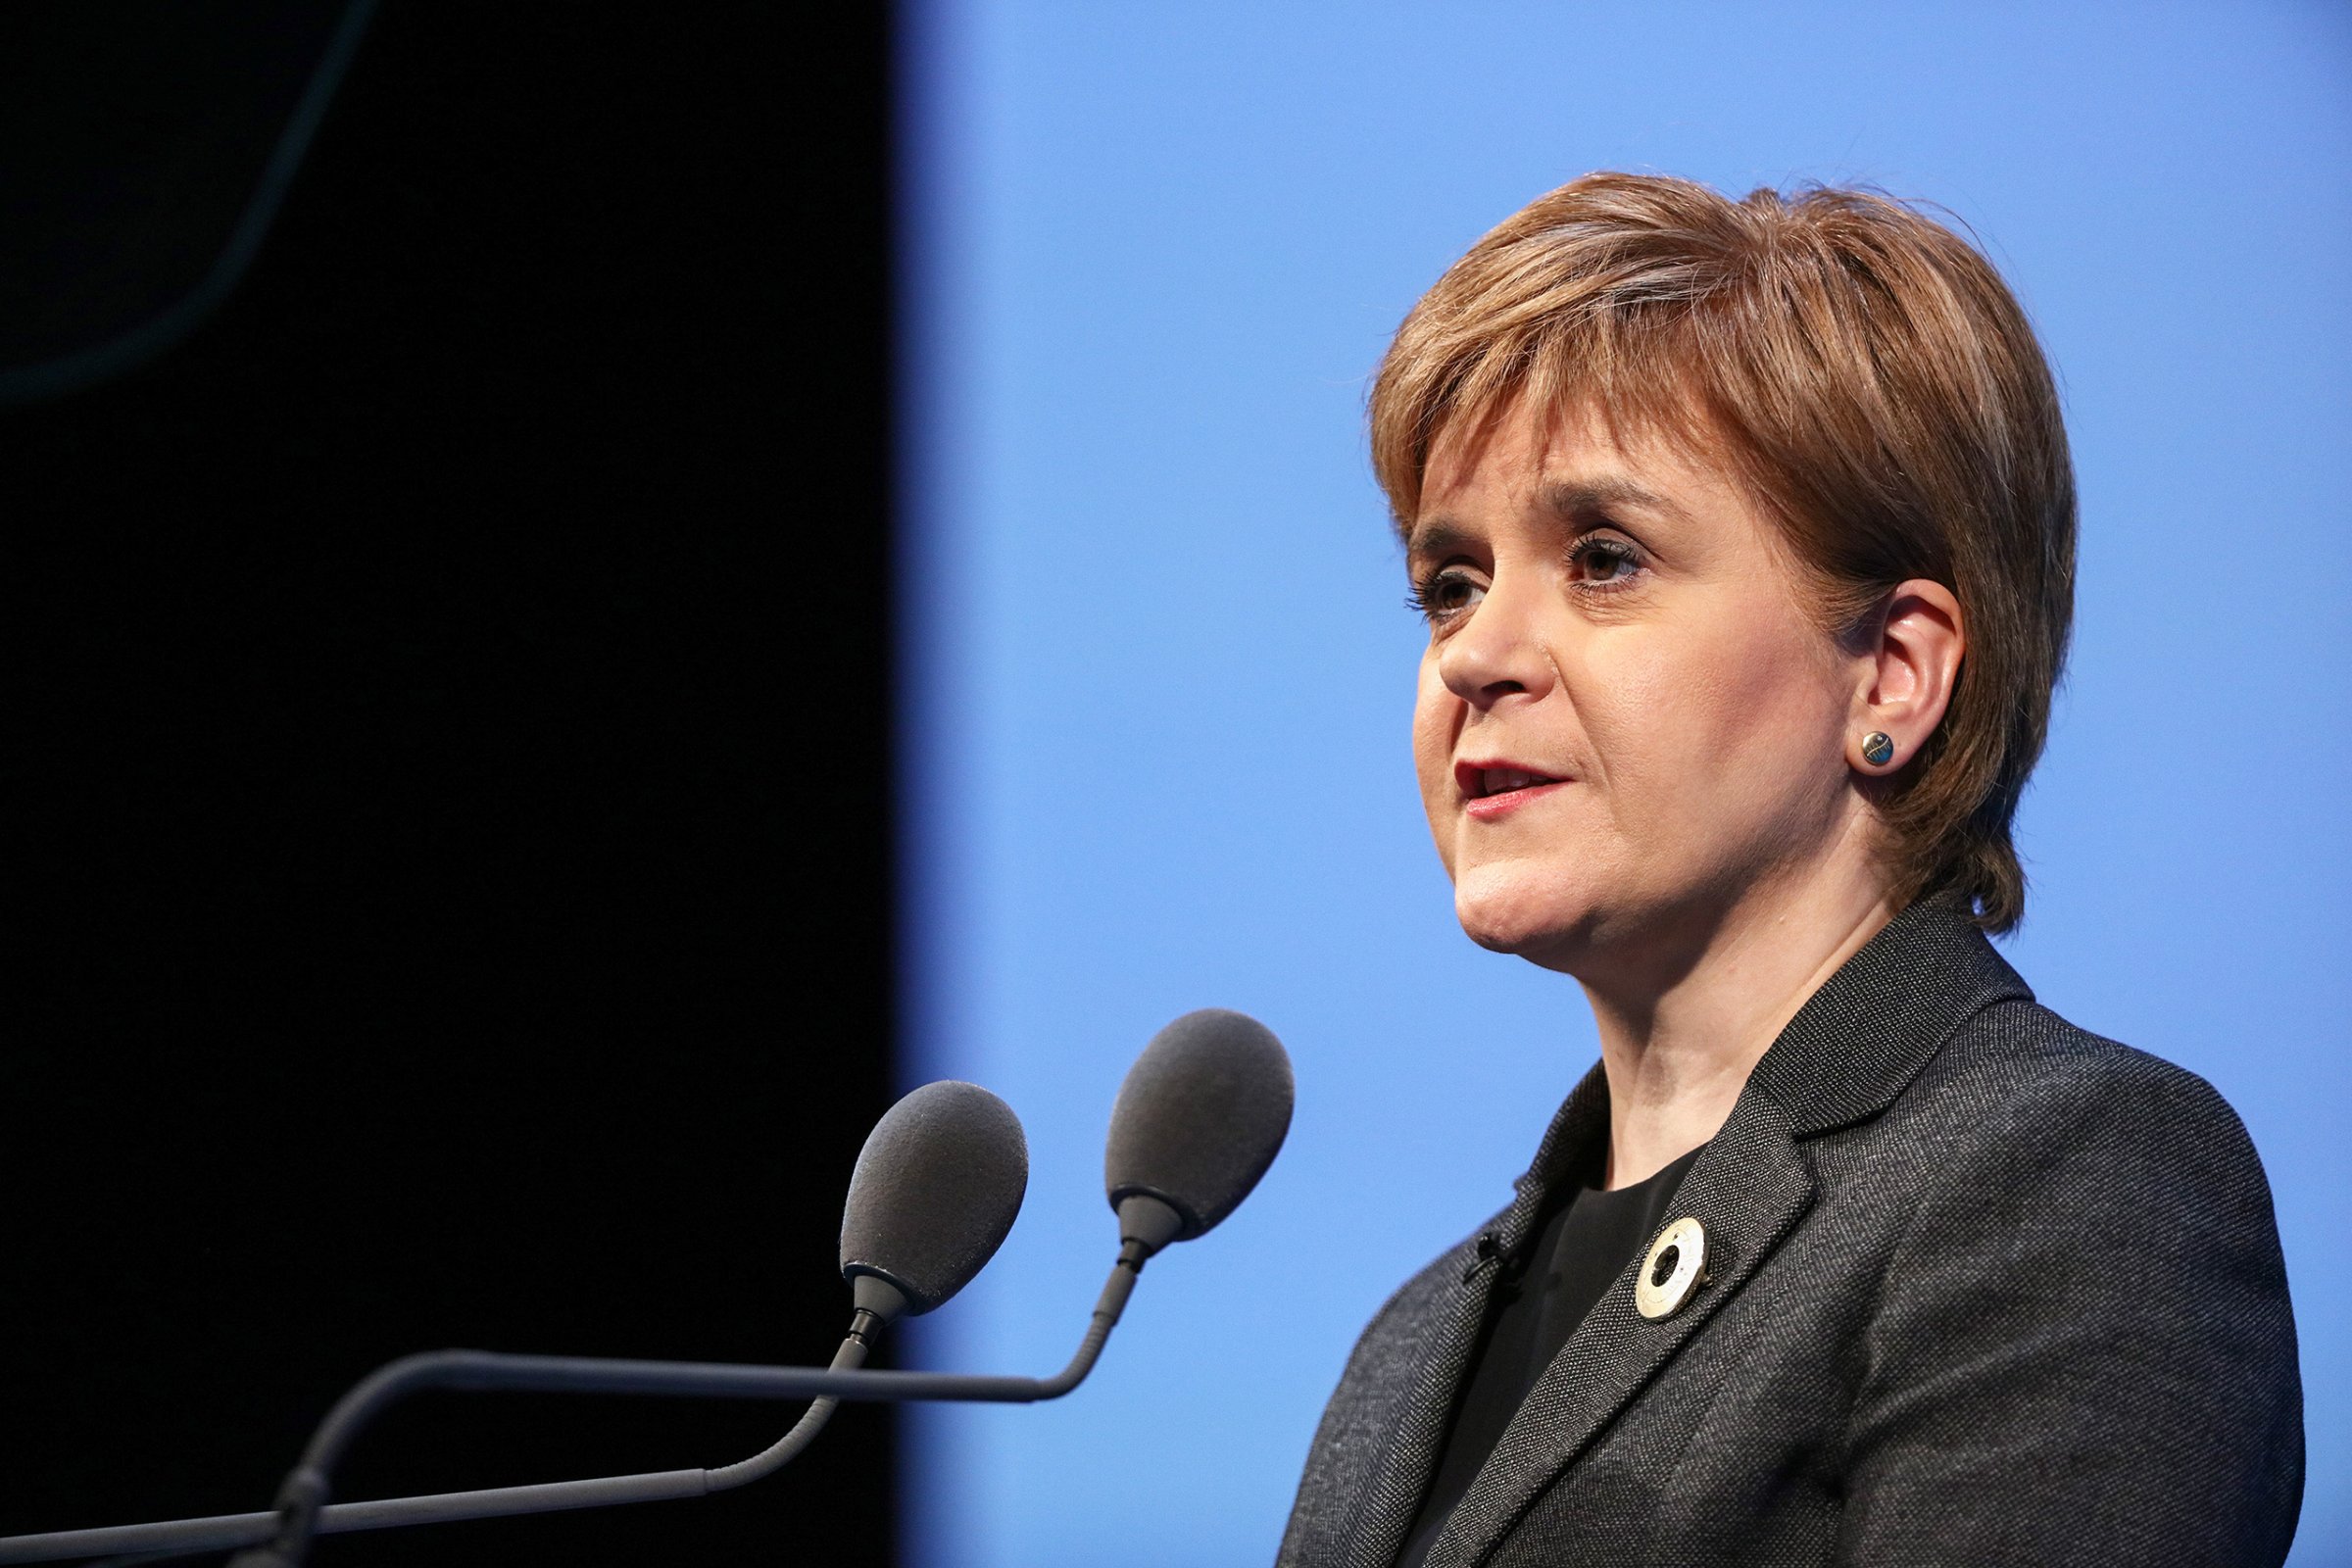 Nicola Sturgeon, Scotland's first minister and leader of the Scottish National Party (SNP), speaks during the Institute of Directors (IoD) Annual Convention 2016 at the Royal Albert Hall in London, U.K., on Sept. 27, 2016. Sturgeon said a second referendum on independence from the U.K. remains a possibility if Scotland can't stay in the European Union single market after Brexit.